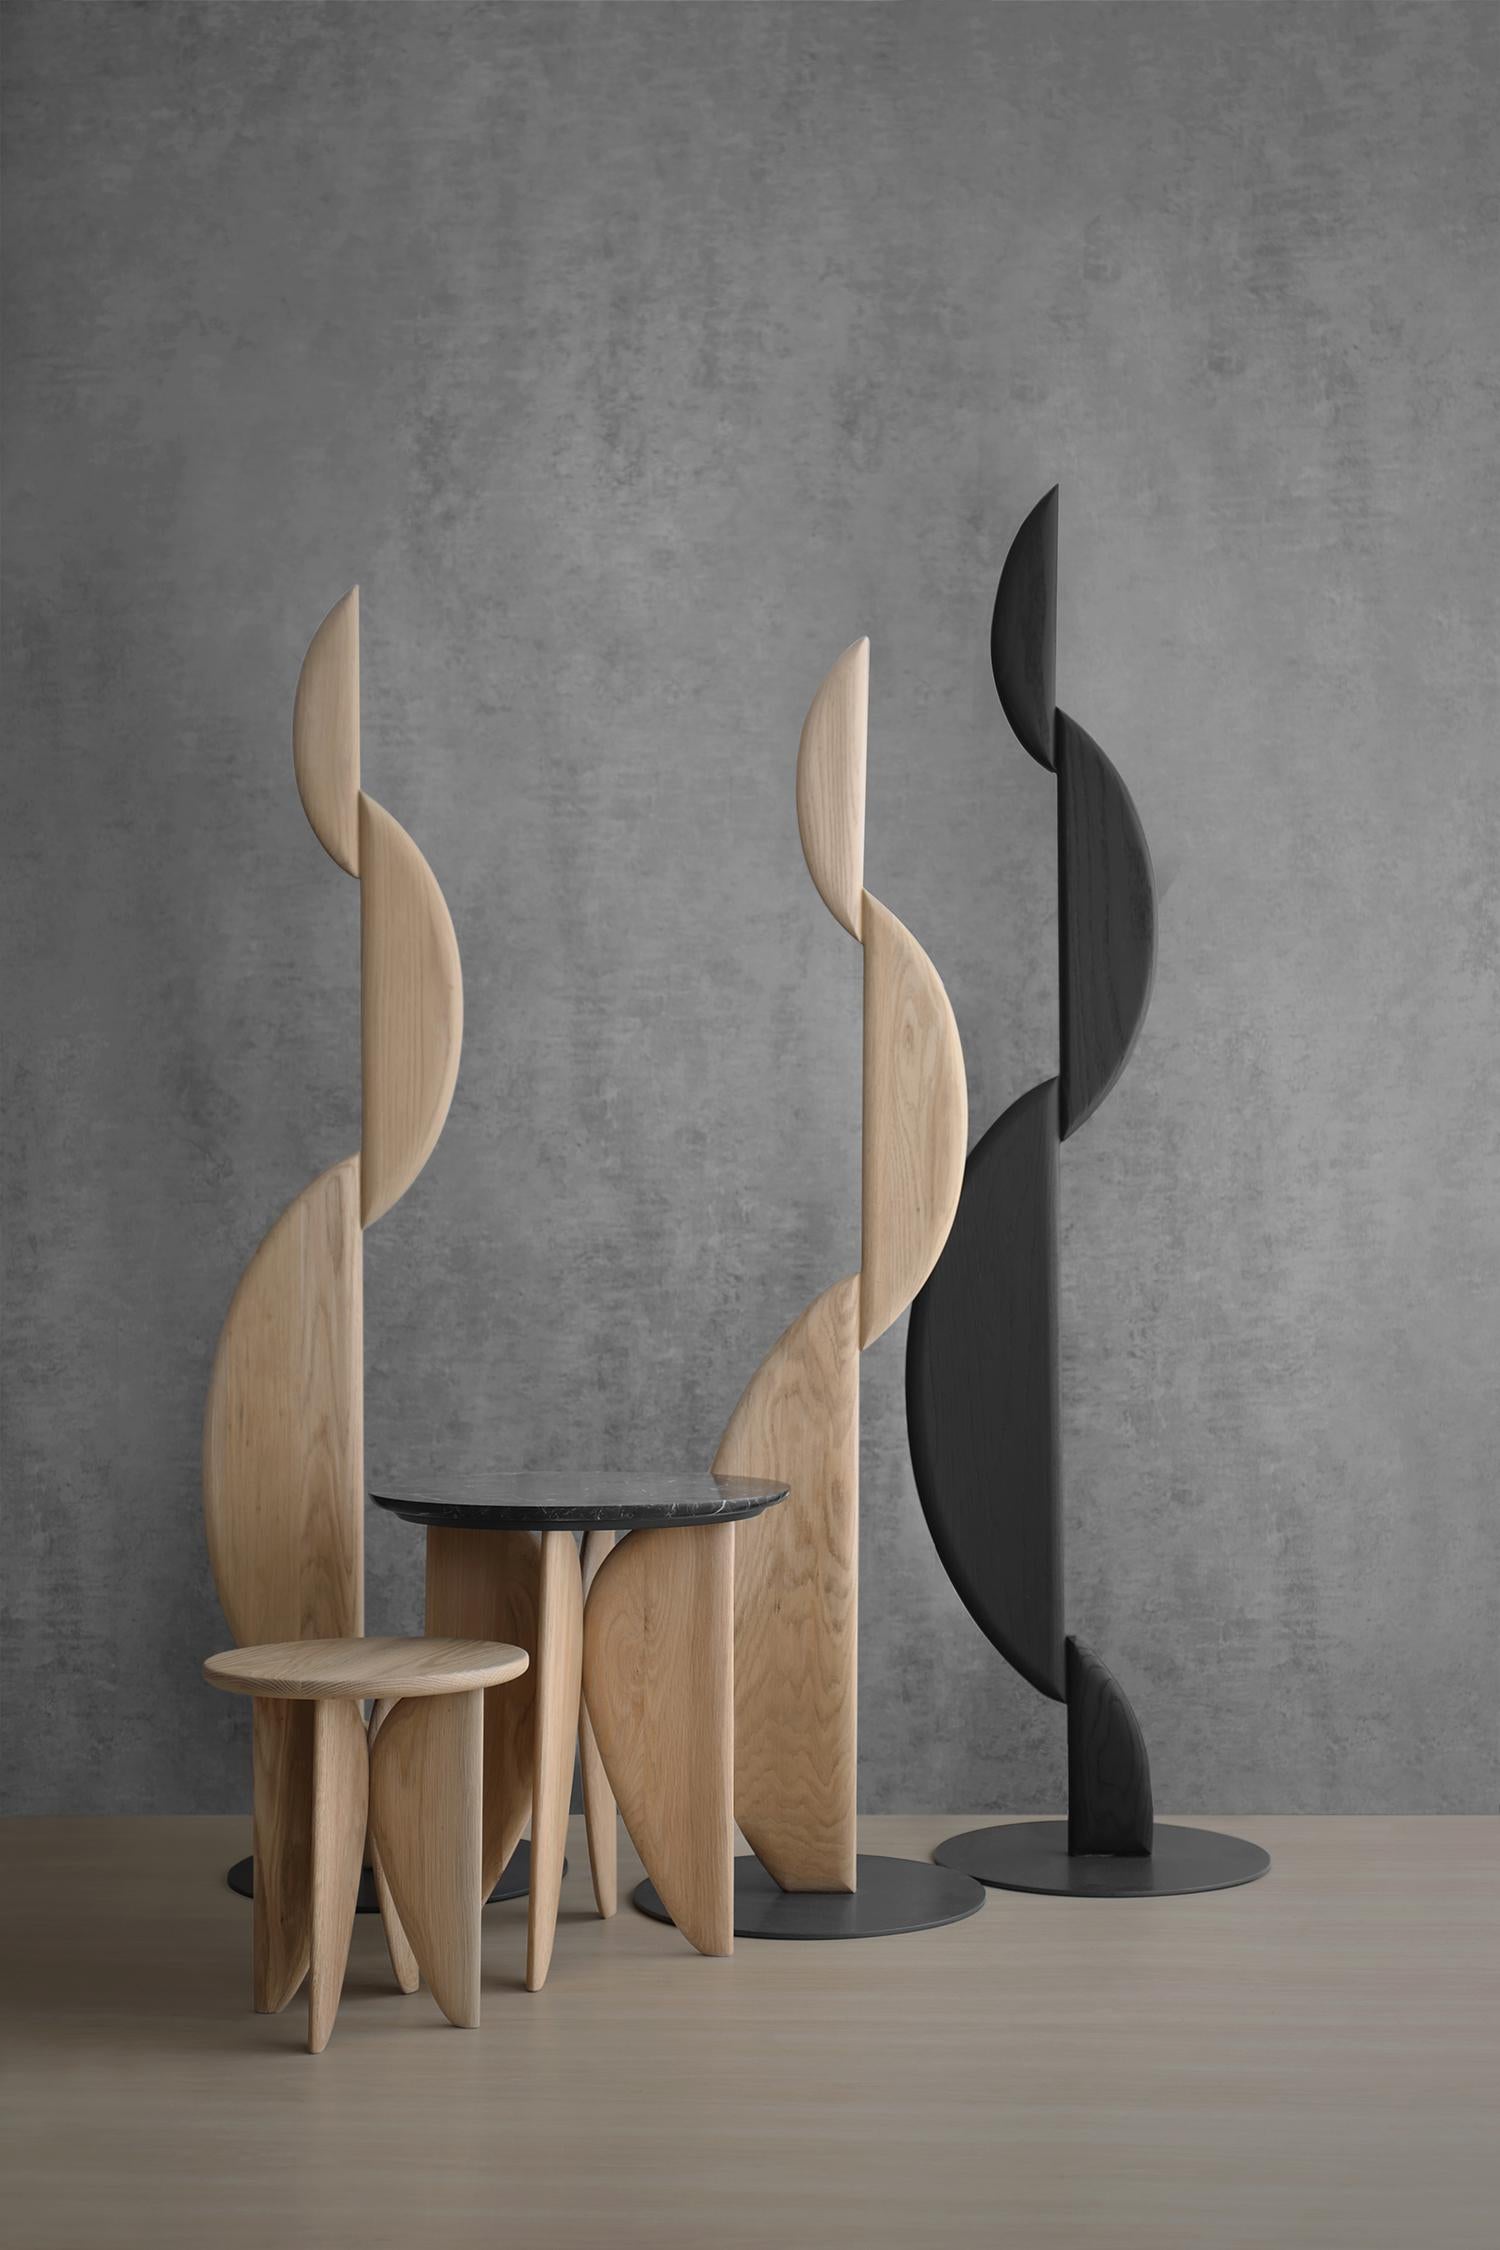 The I Primera Sculpture is part of Noviembre collection, which offers a compelling range of furniture, inviting exploration of form, function, and the serene lines that define each piece. Inspired by Constantin Brancusi's artistic philosophy, the